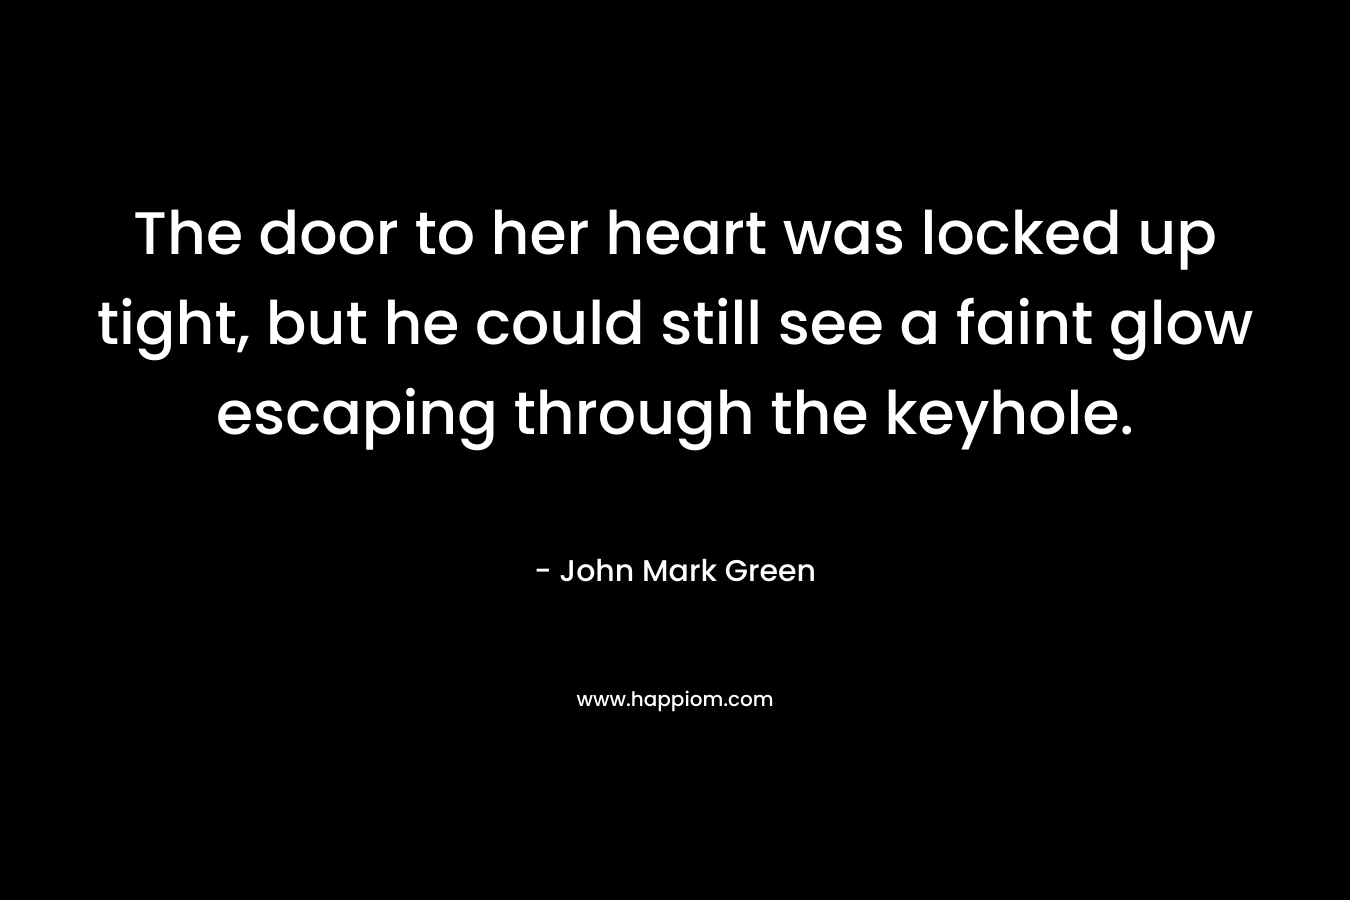 The door to her heart was locked up tight, but he could still see a faint glow escaping through the keyhole.